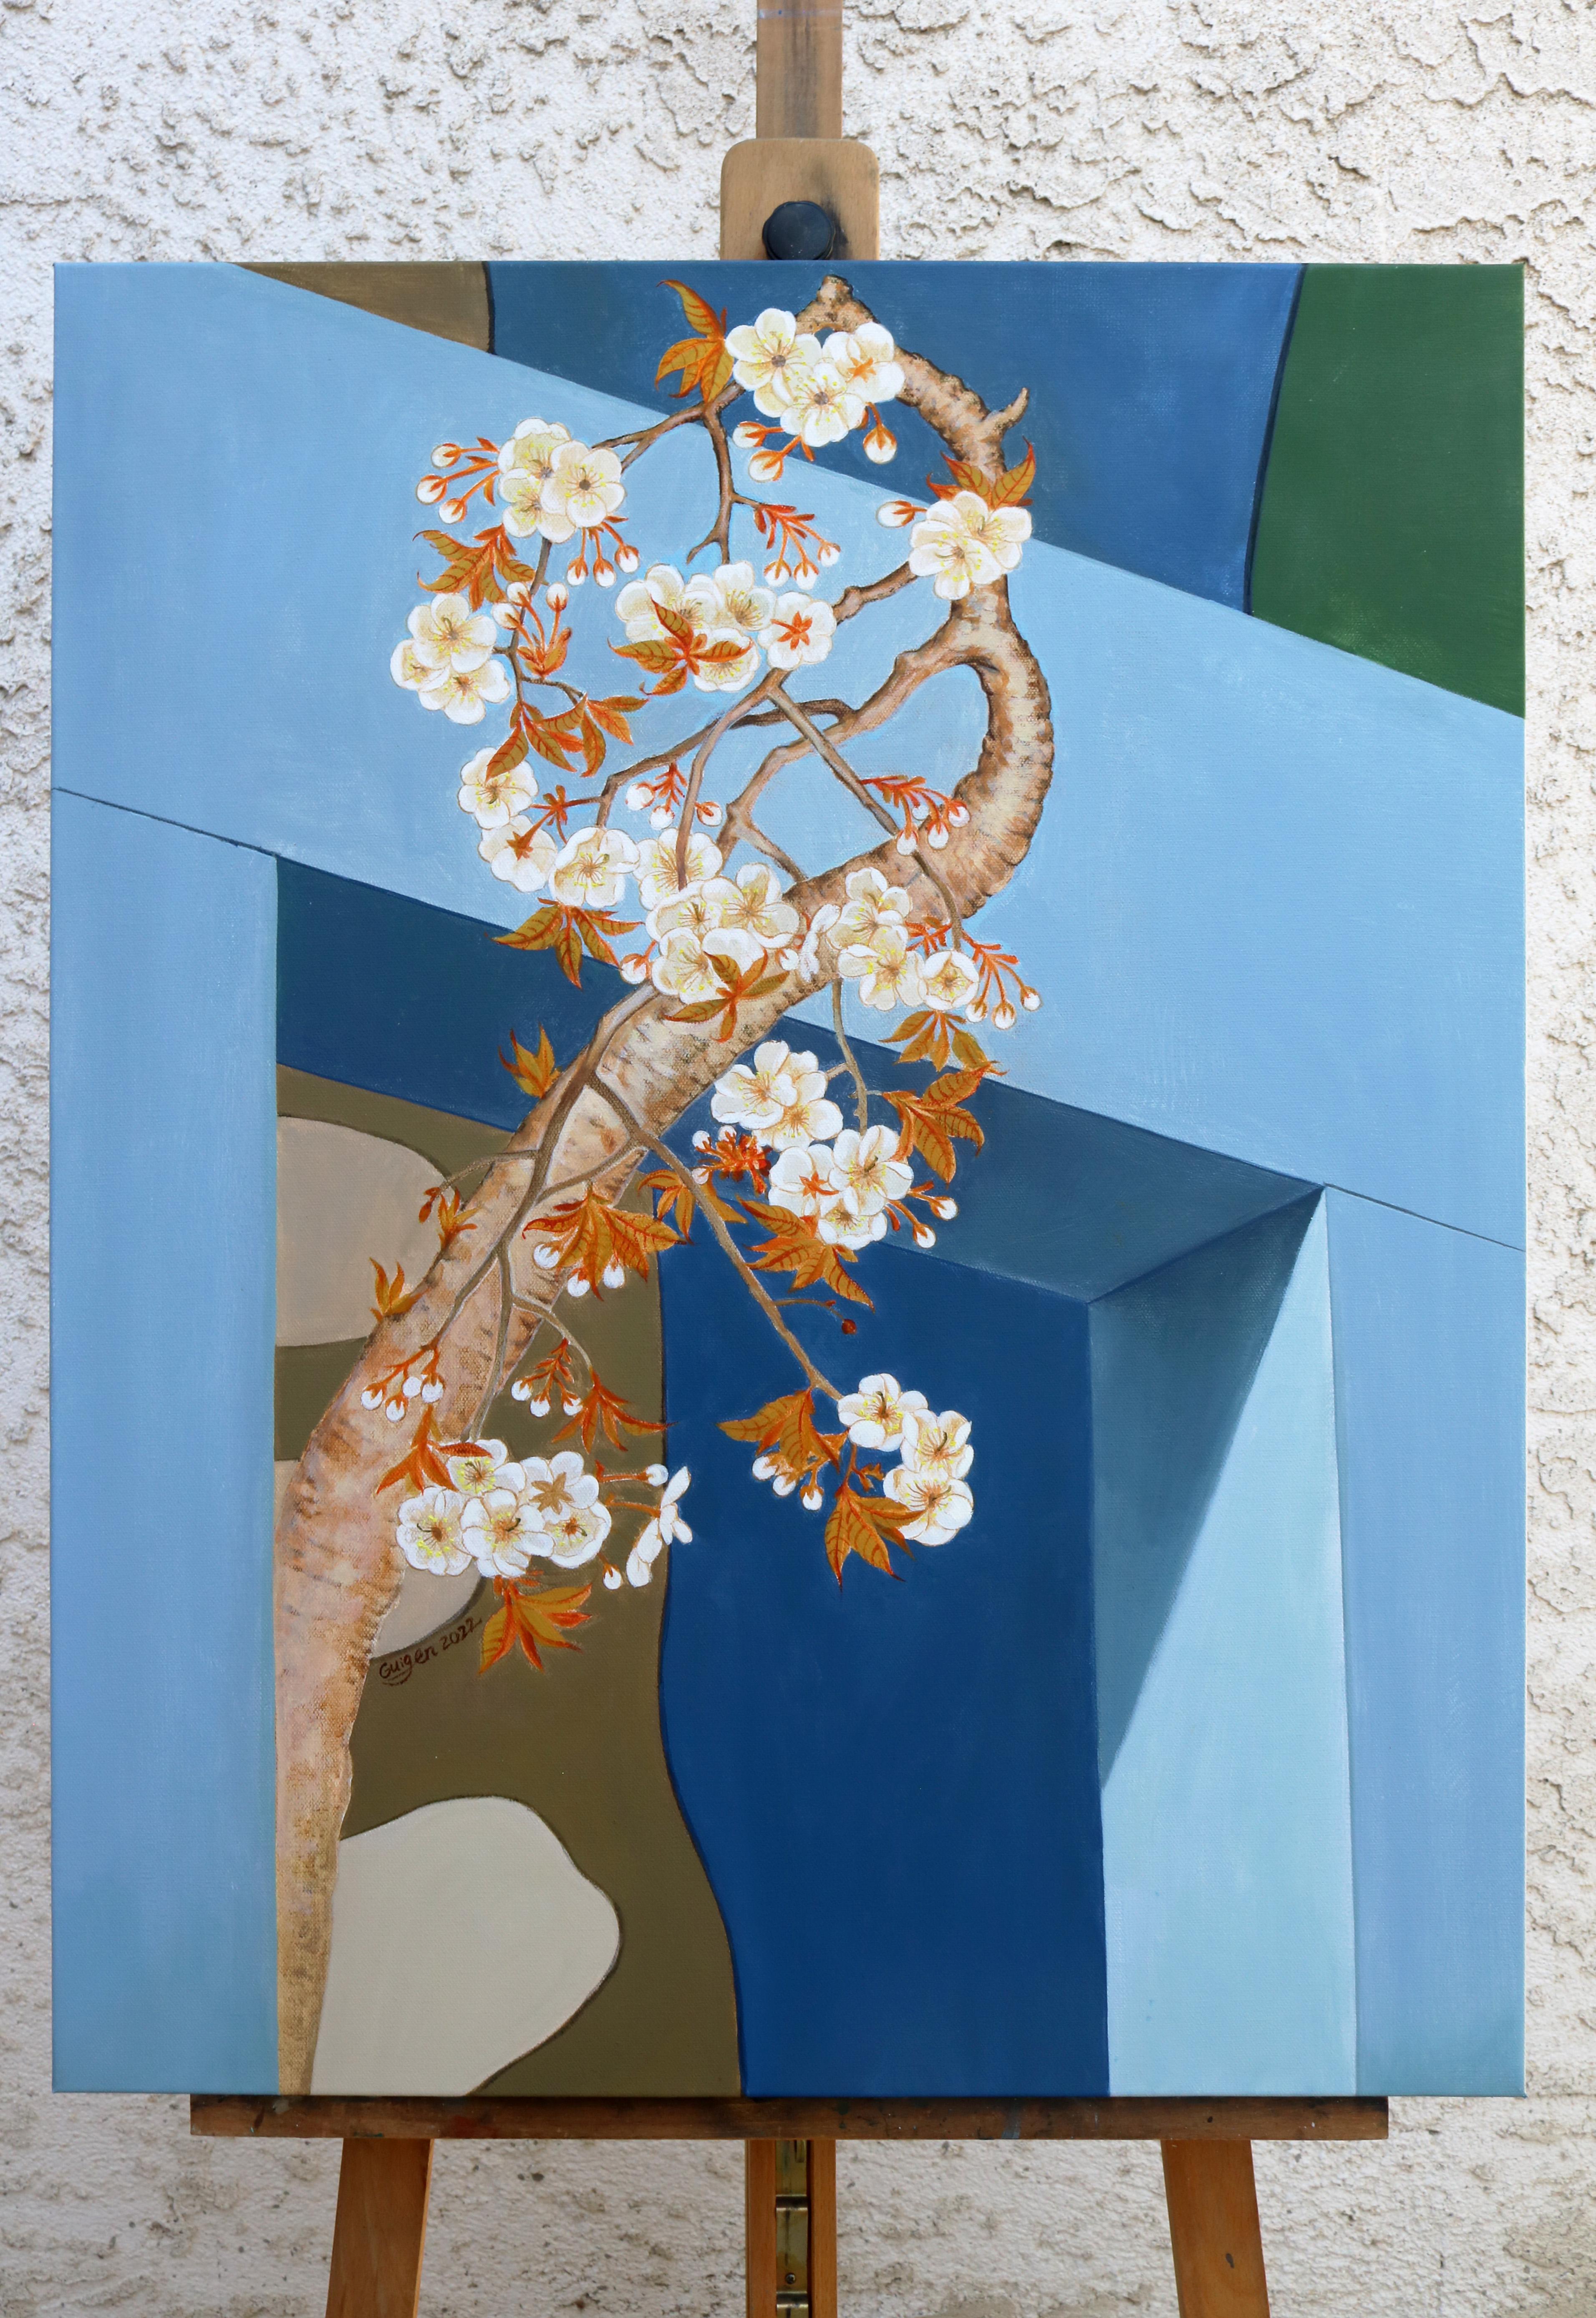 <p>Artist Comments<br>In skilled realism, artist Guigen Zha displays a plum branch blooming out of a pale blue wall. The curvature of the tree contrasts strongly with the rigidity of the geometric structure. The interpolation represents the